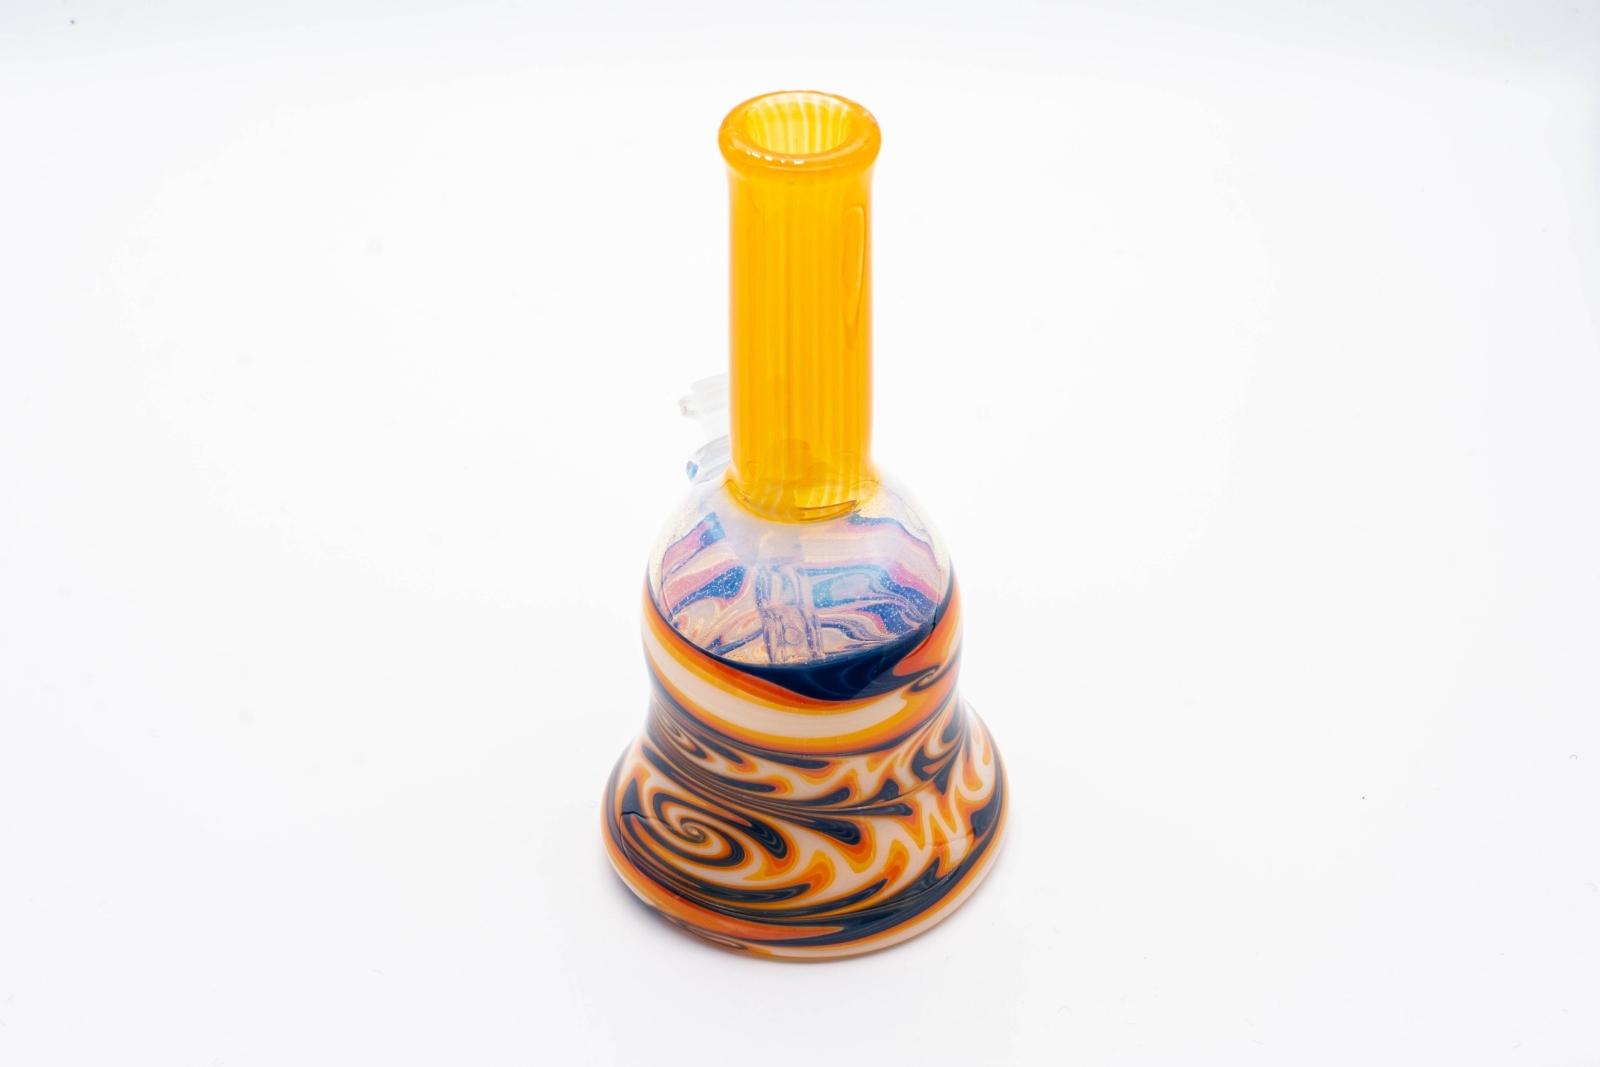 A tangie 6-inch glass rig, made by Bradfurd Glass, on a white background